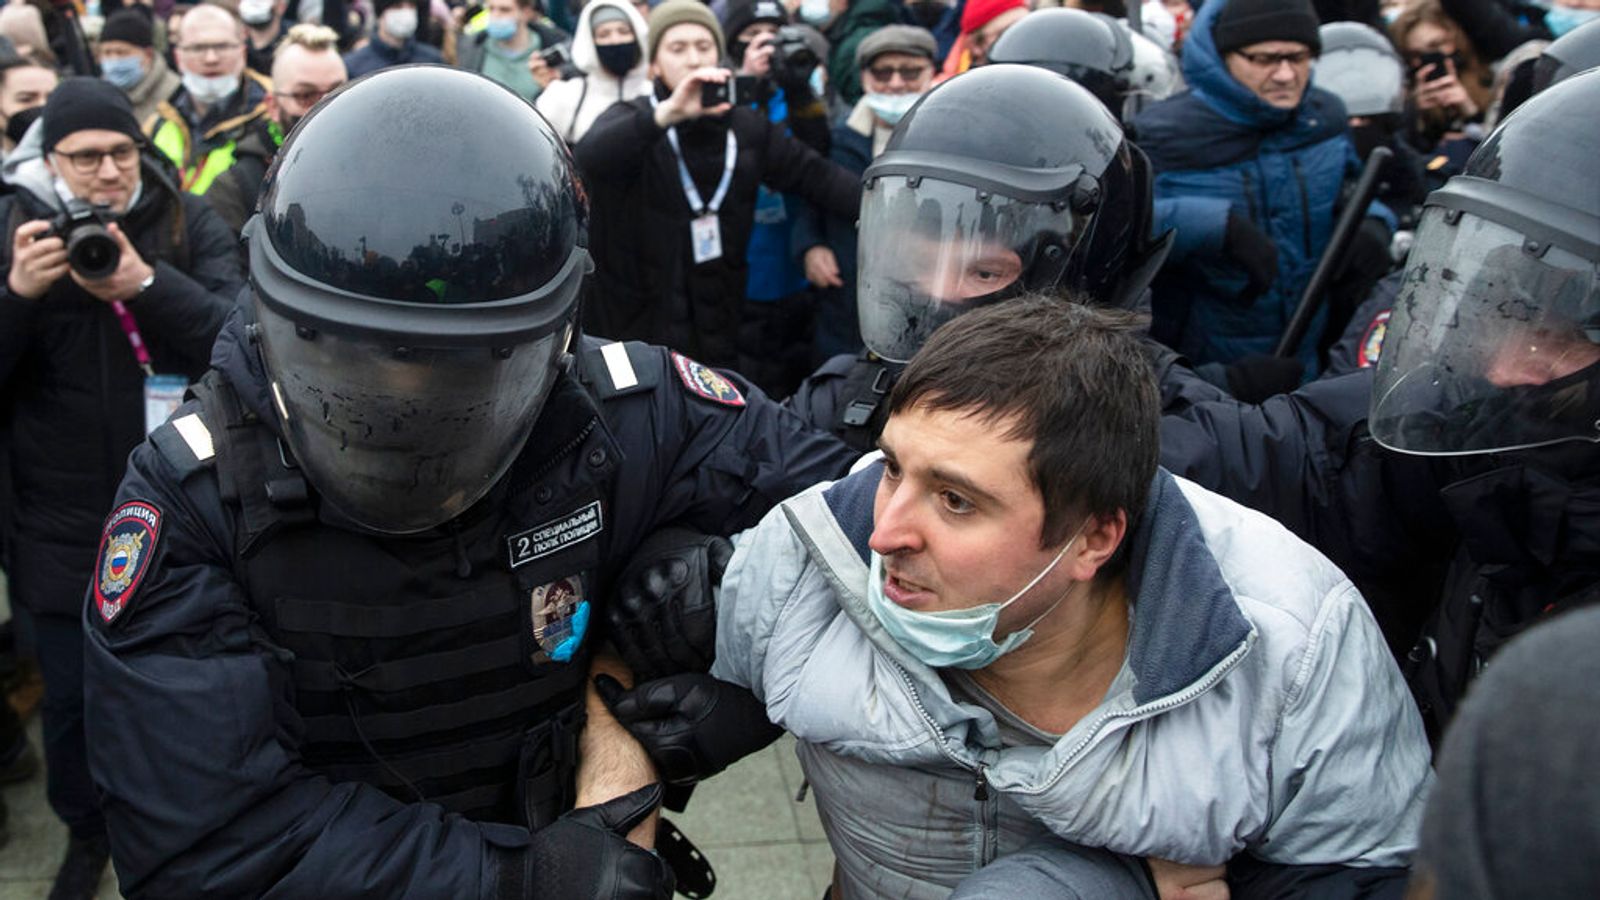 US and UK condemn 'harsh tactics' as thousands of Alexei Navalny supporters arrested amid mass protests